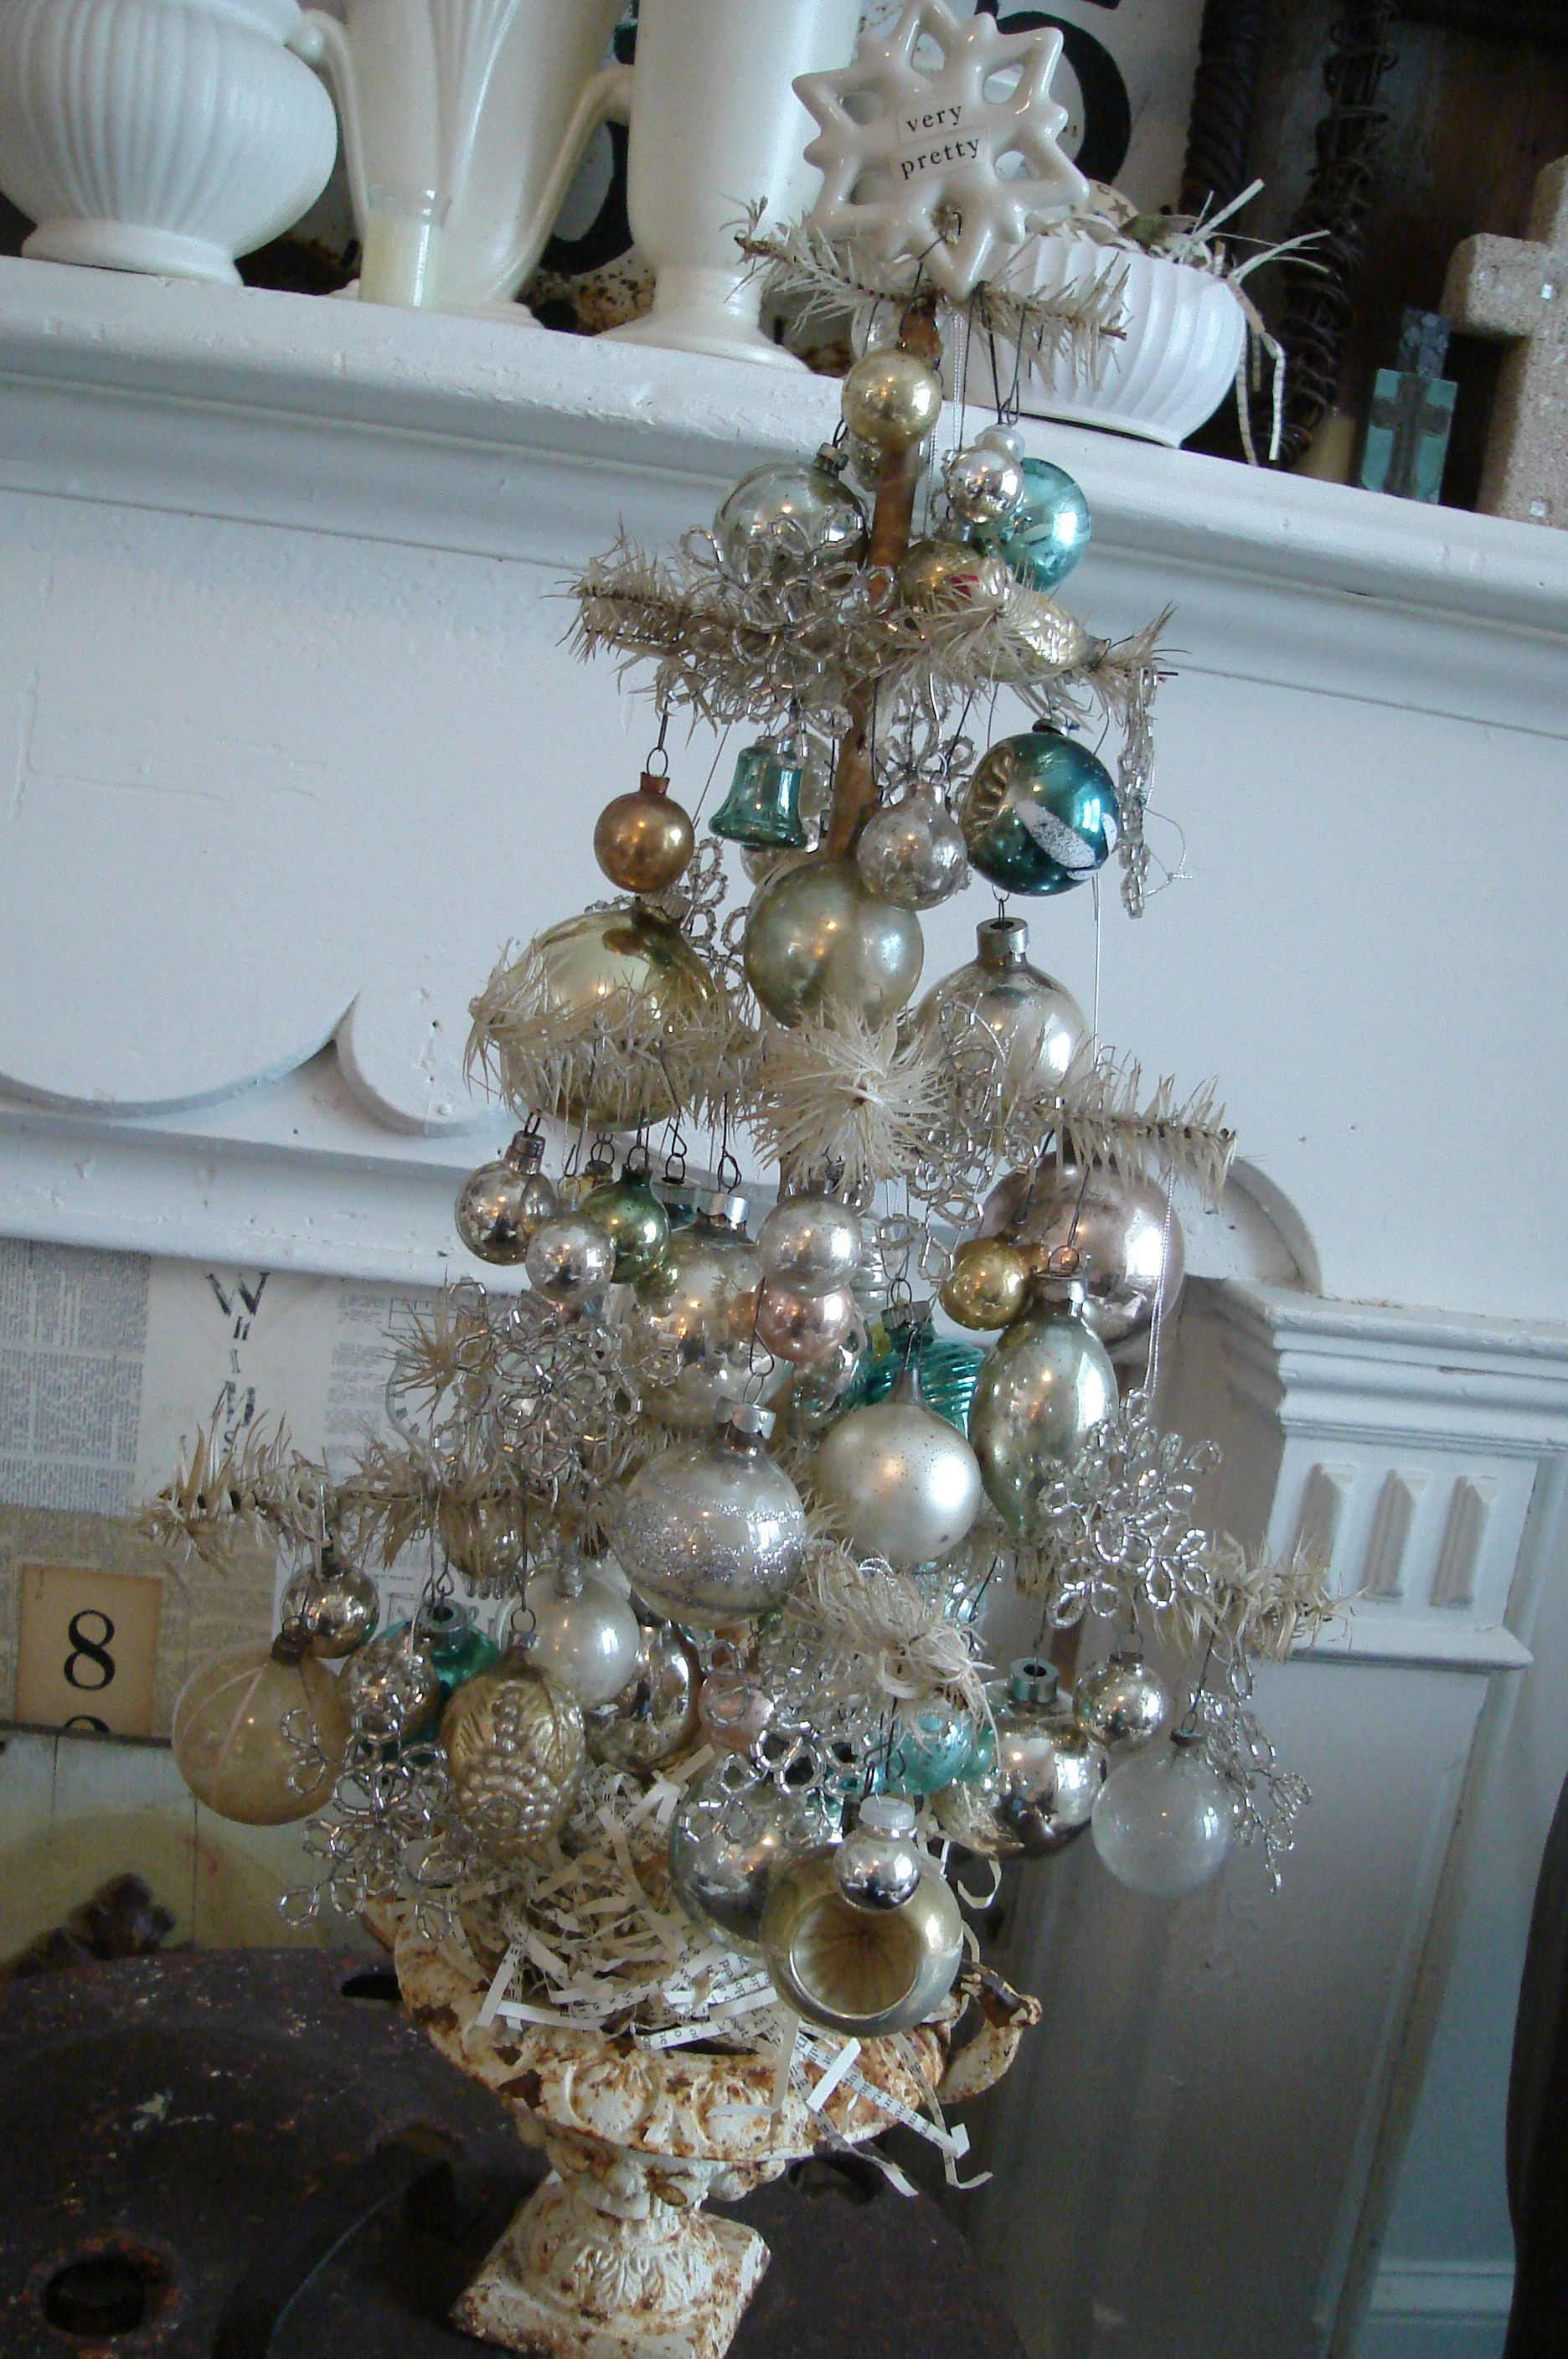 The Rooftop Christmas Tree Cast
 Table top Christmas tree in cast iron planter in silver